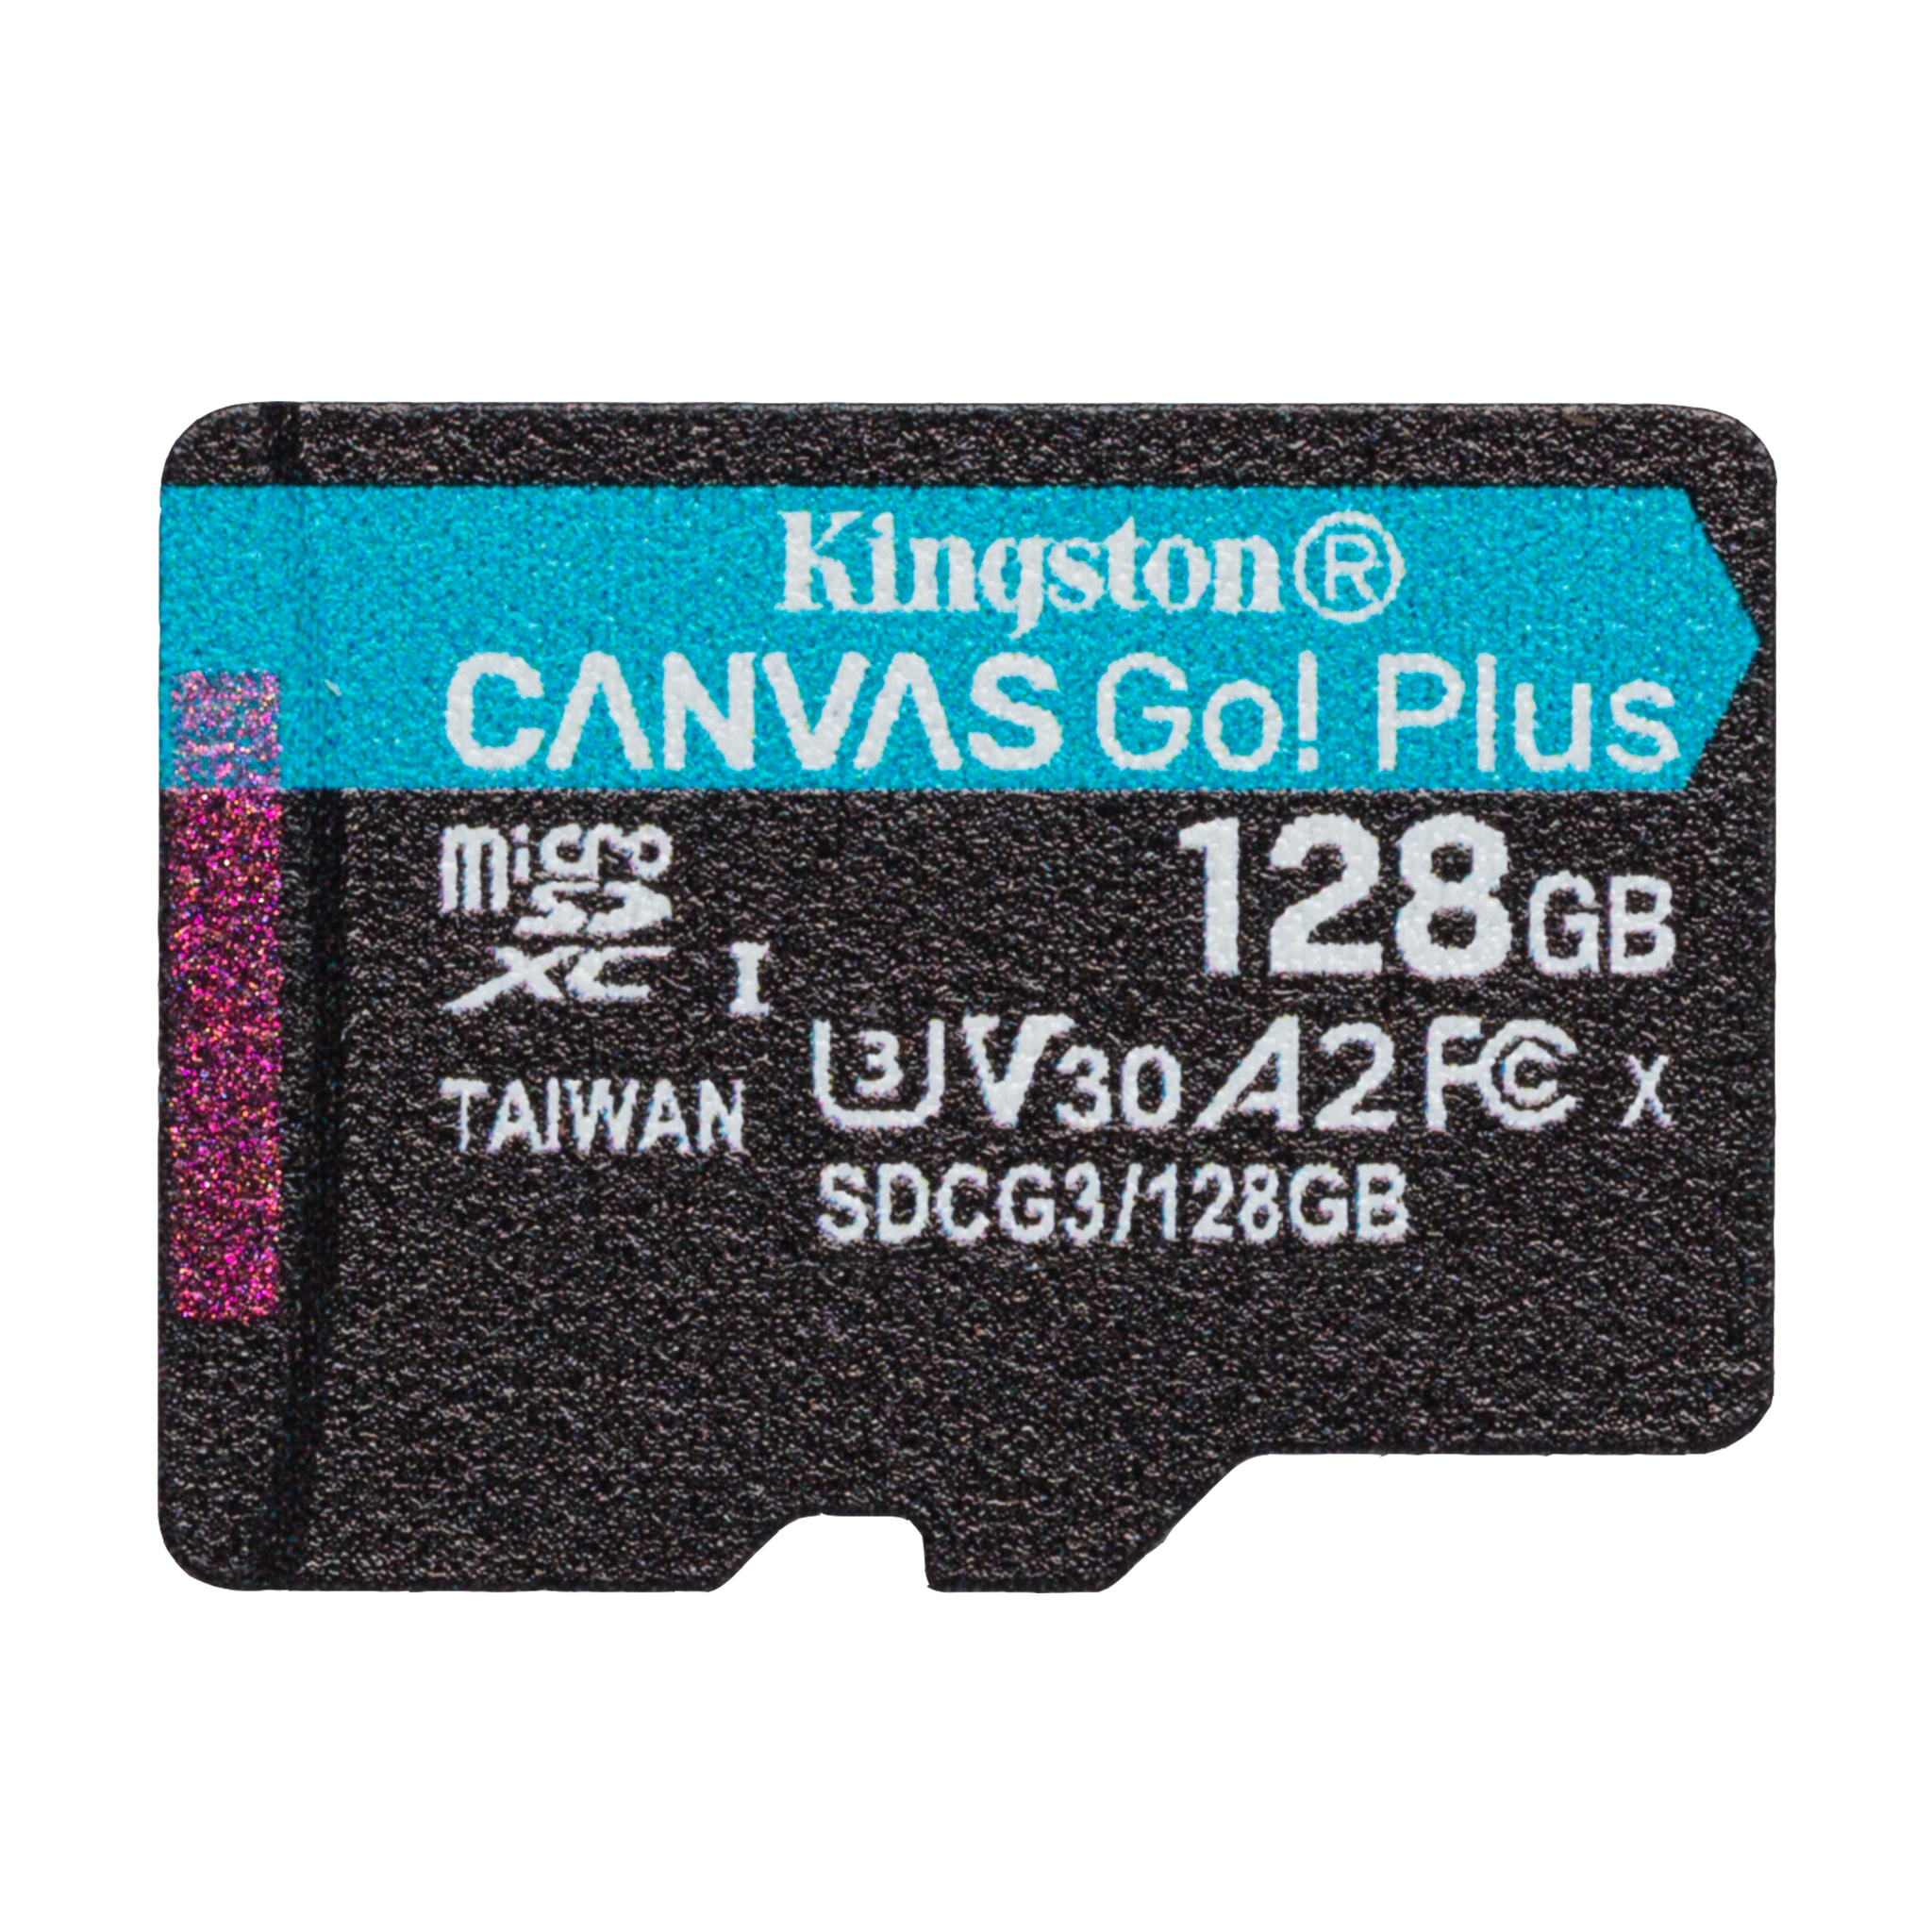 100MBs Works with Kingston Kingston 64GB Micromax A54 Smarty 3.5 MicroSDXC Canvas Select Plus Card Verified by SanFlash. 